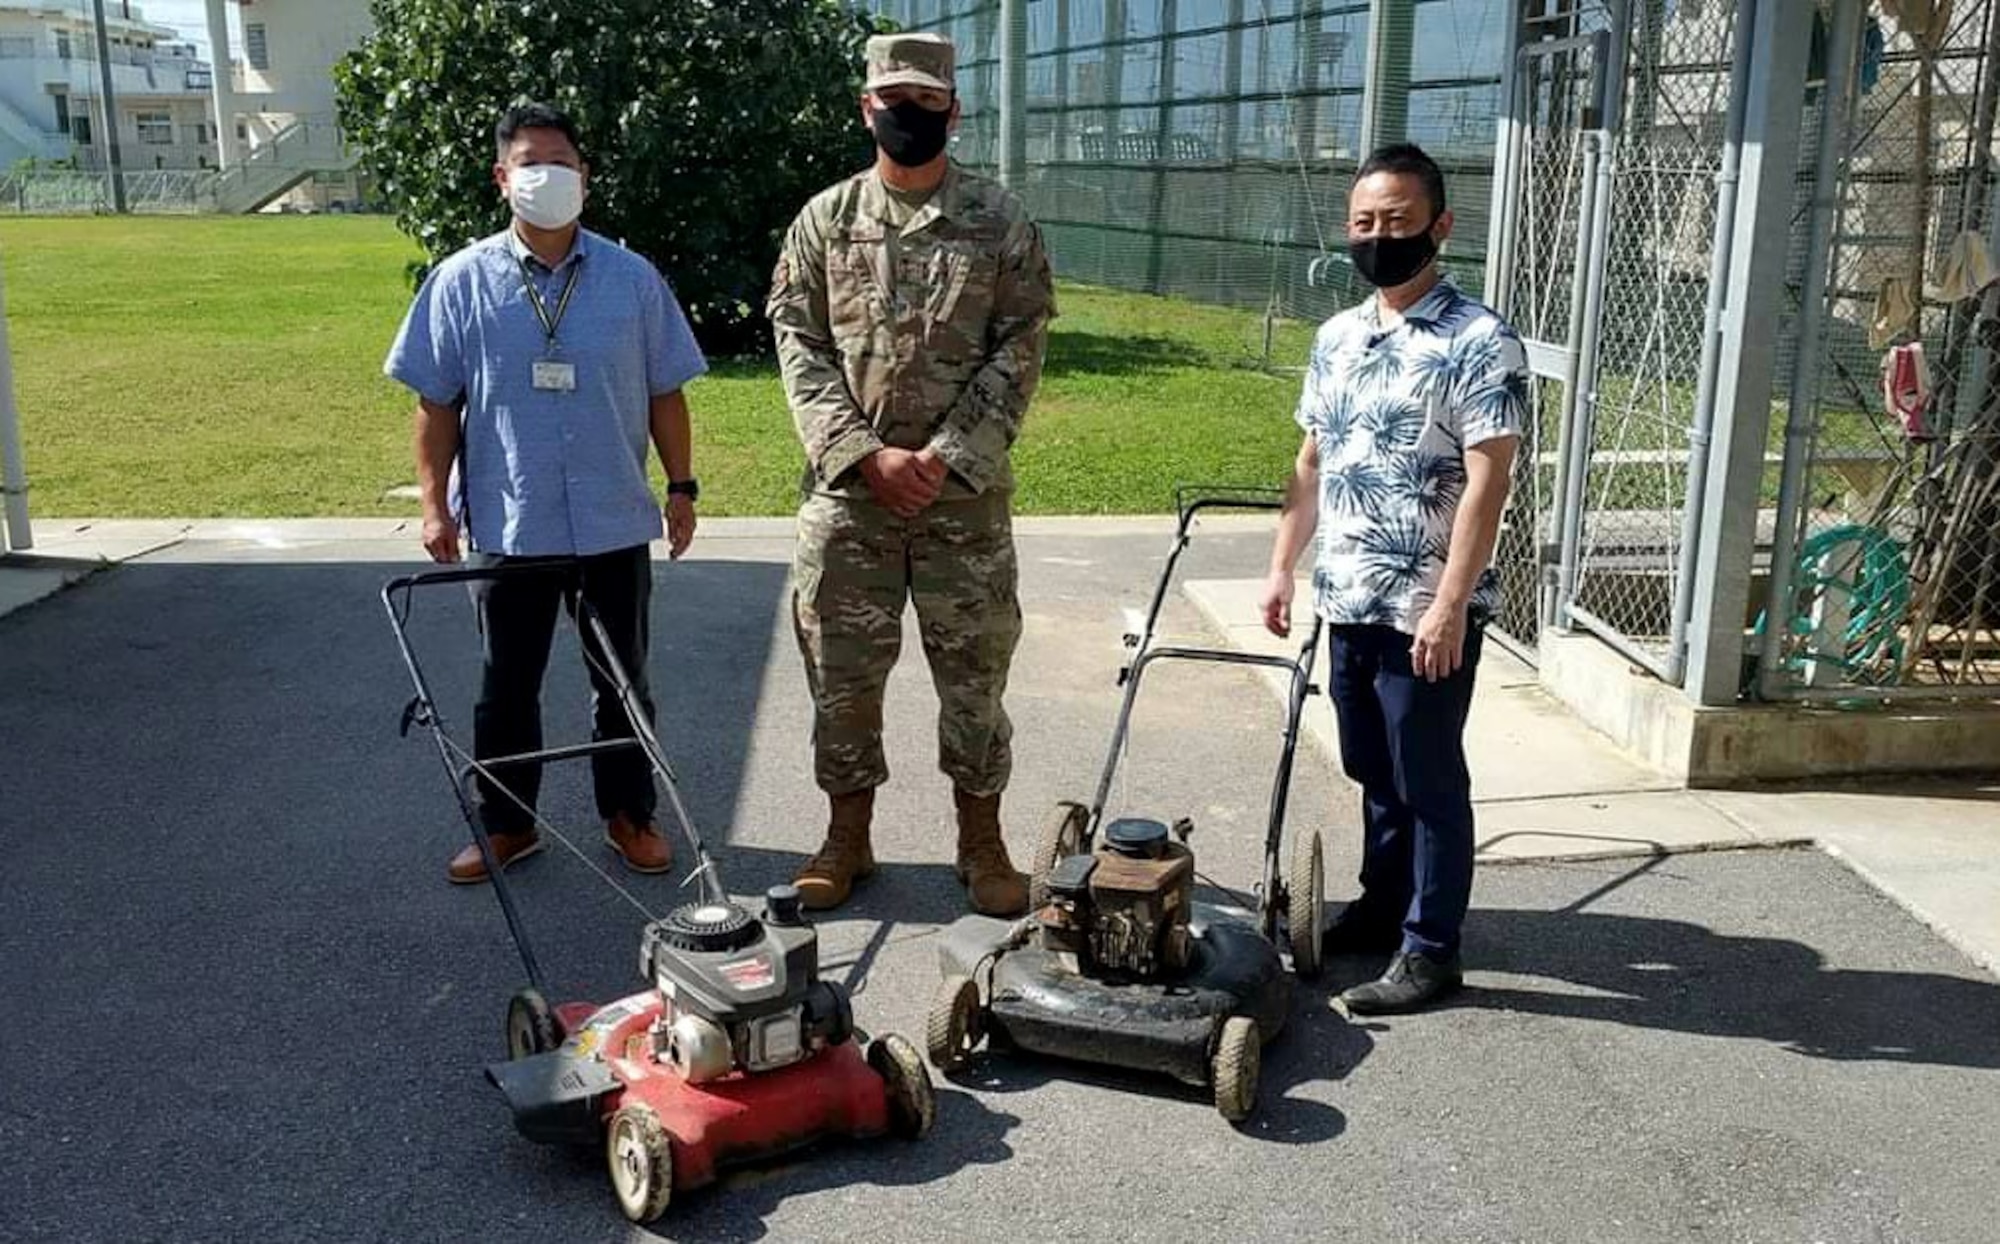 Three men stand behind two lawnmowers.